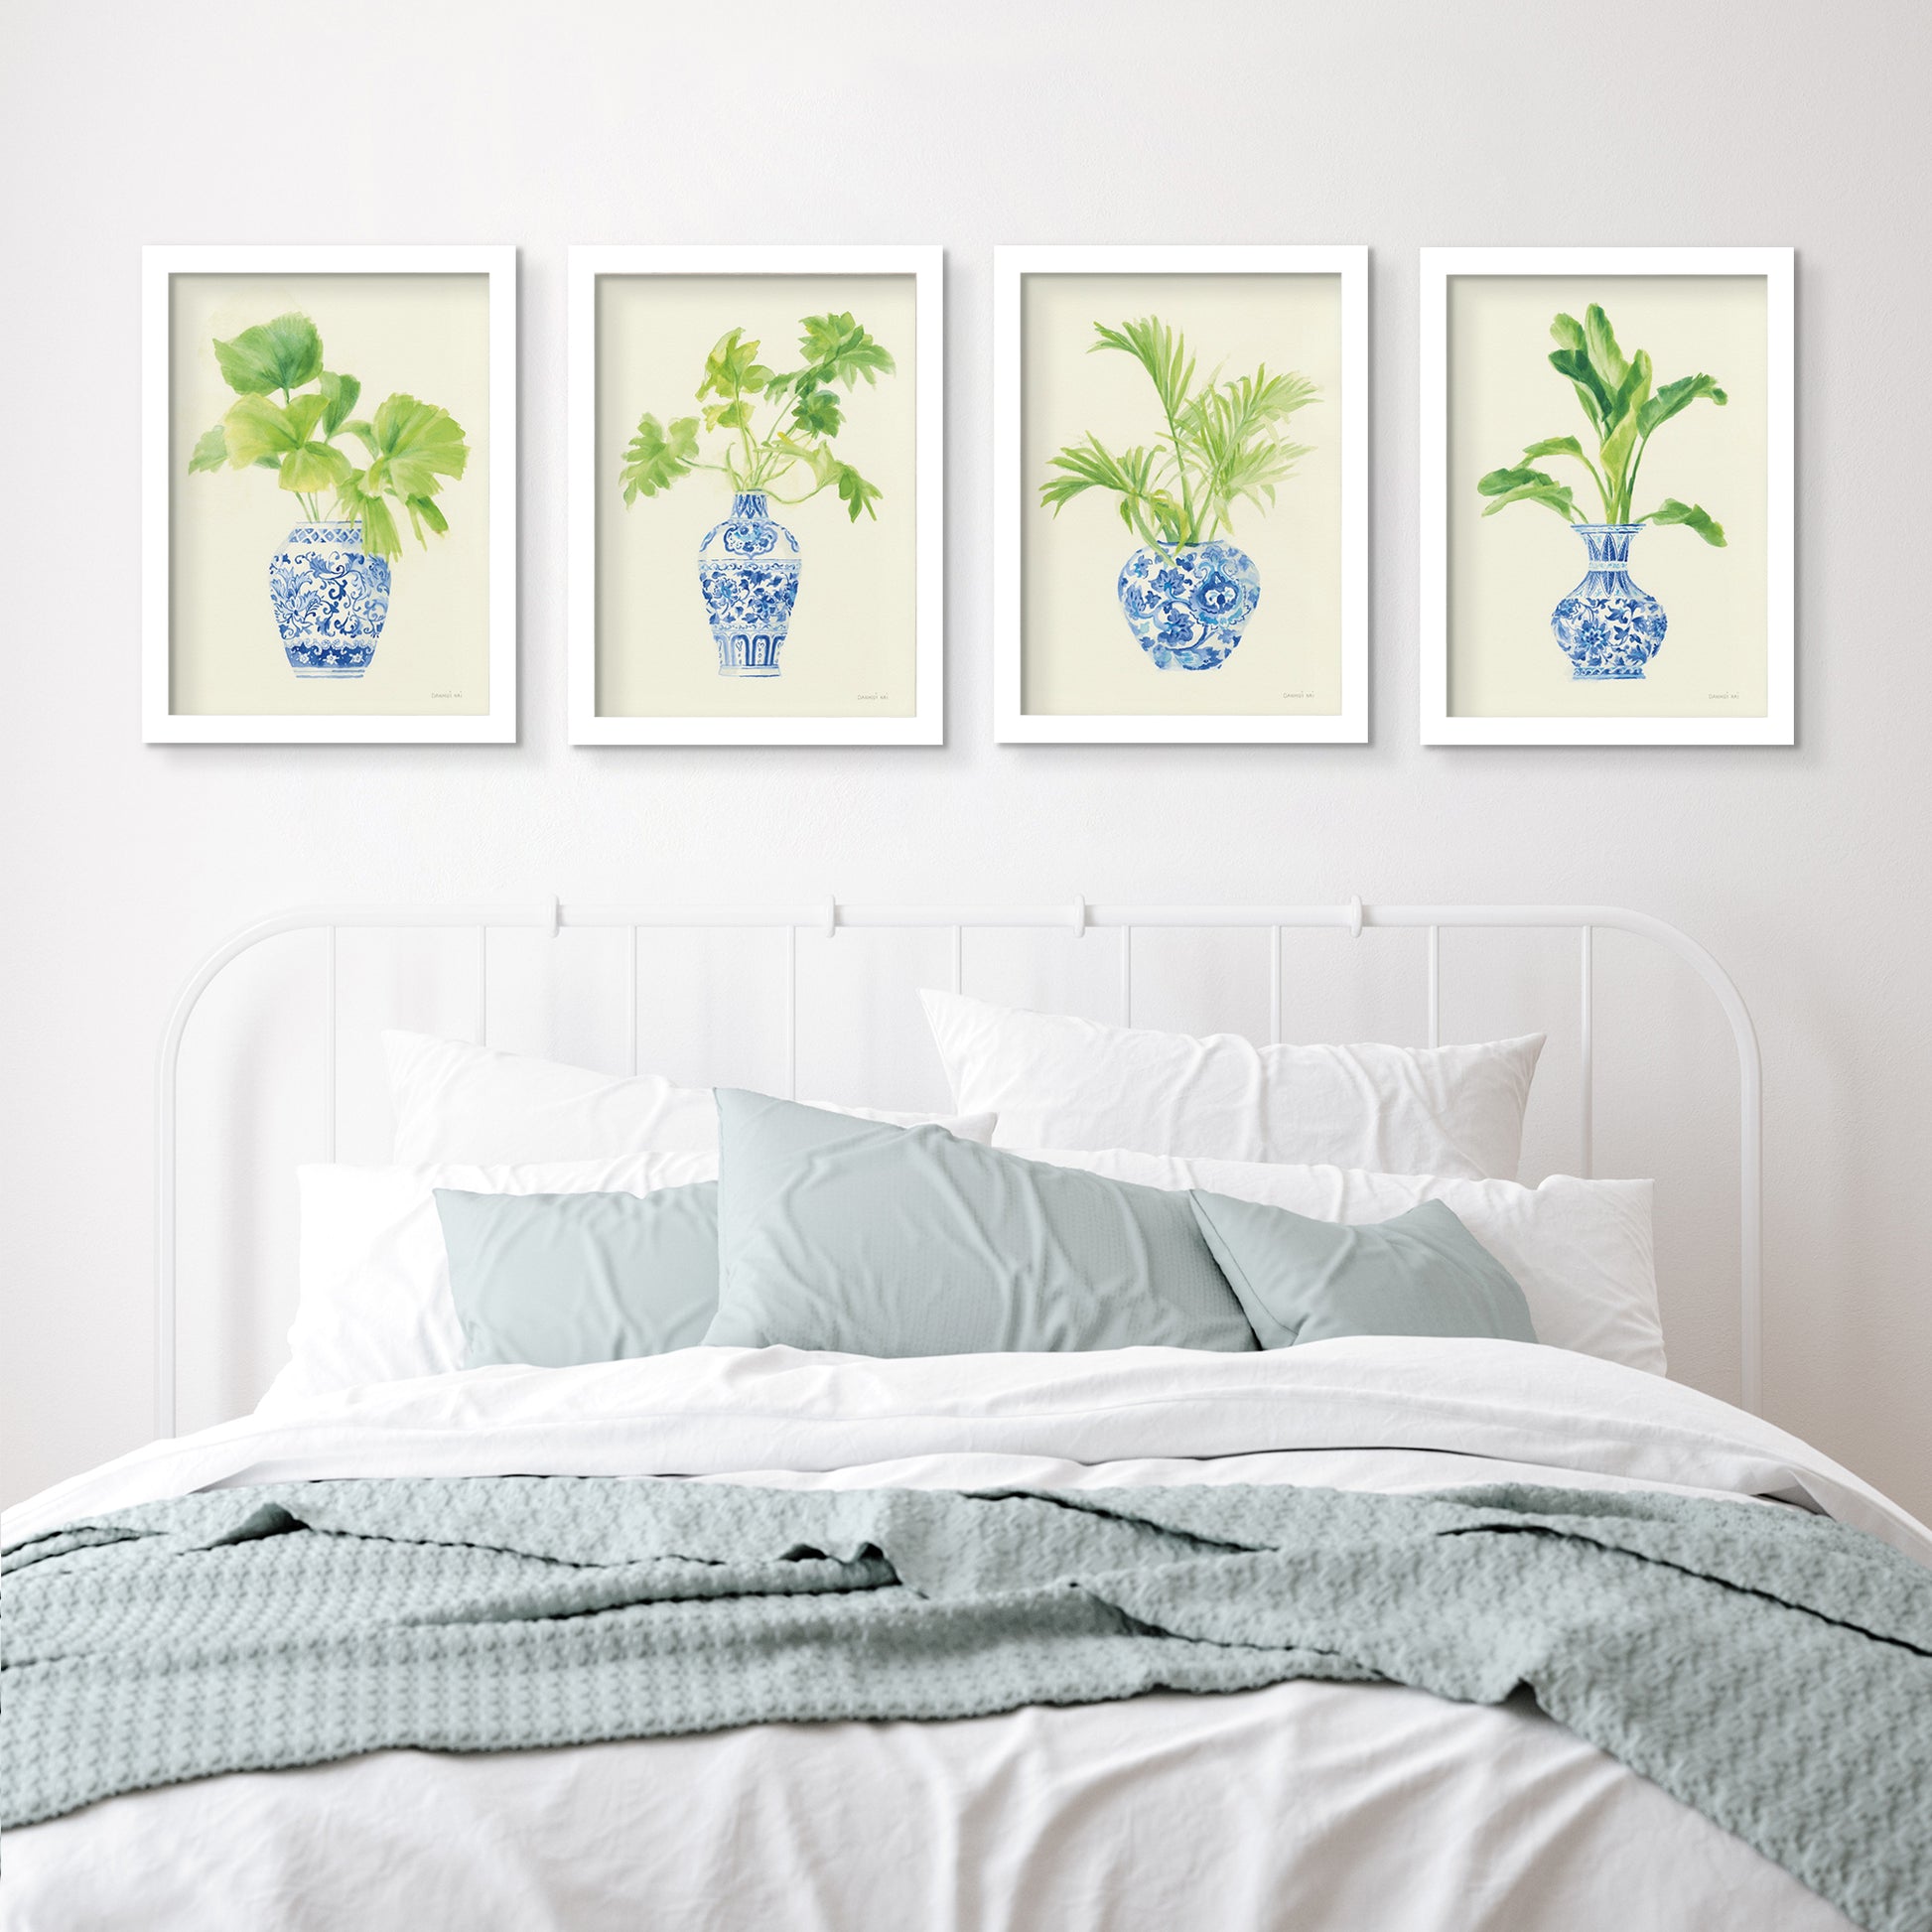 Blue Vases by Danhui Nai - 4 Piece Gallery Framed Print Art Set - Americanflat